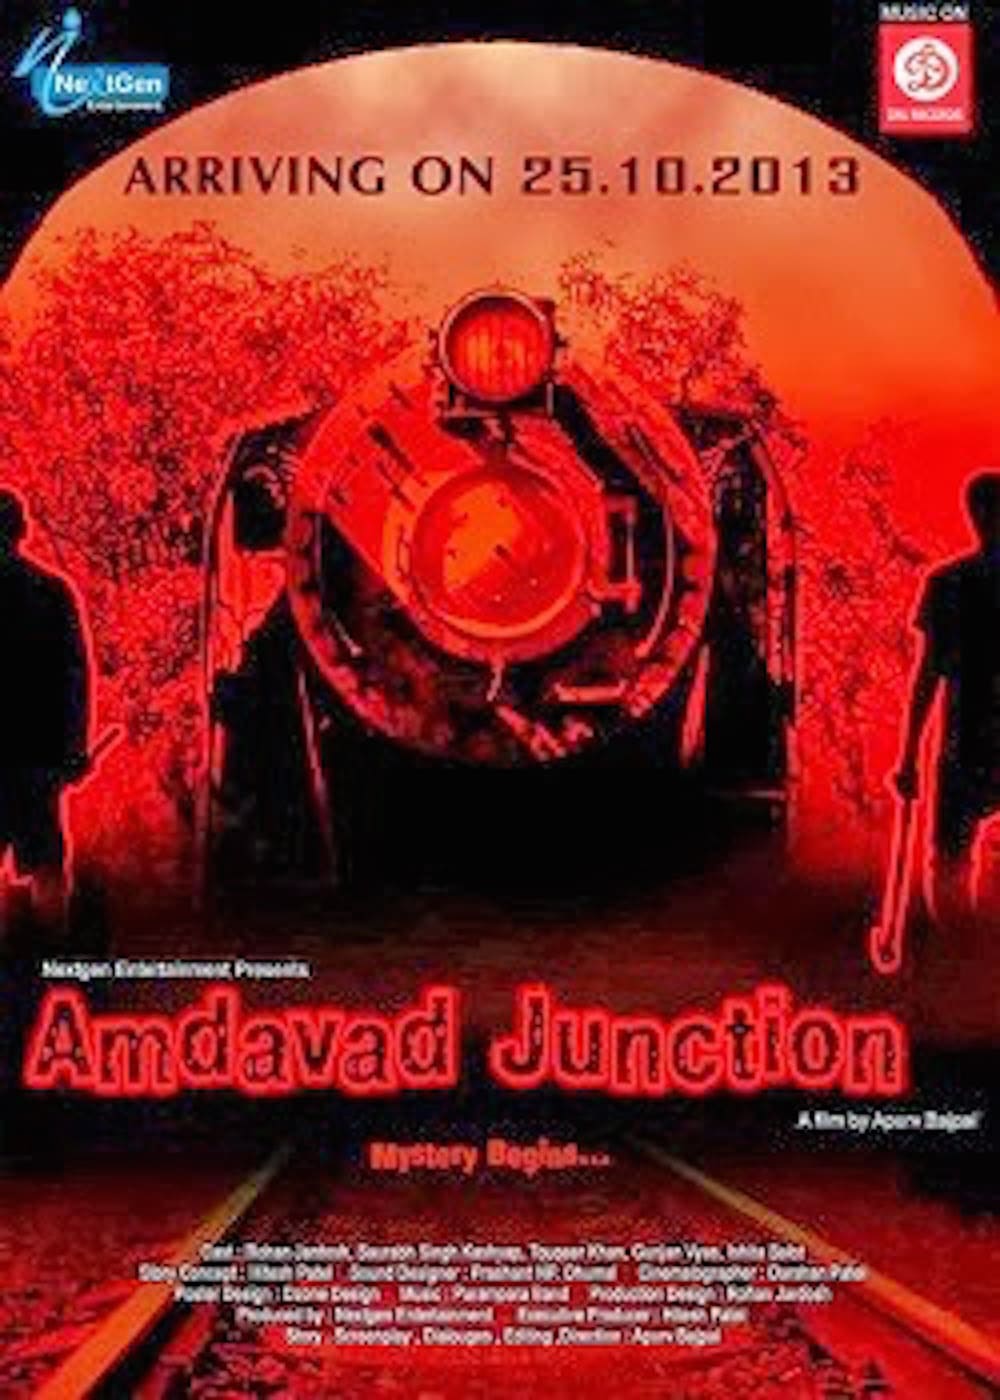 Poster for the movie "Amdavad Junction"